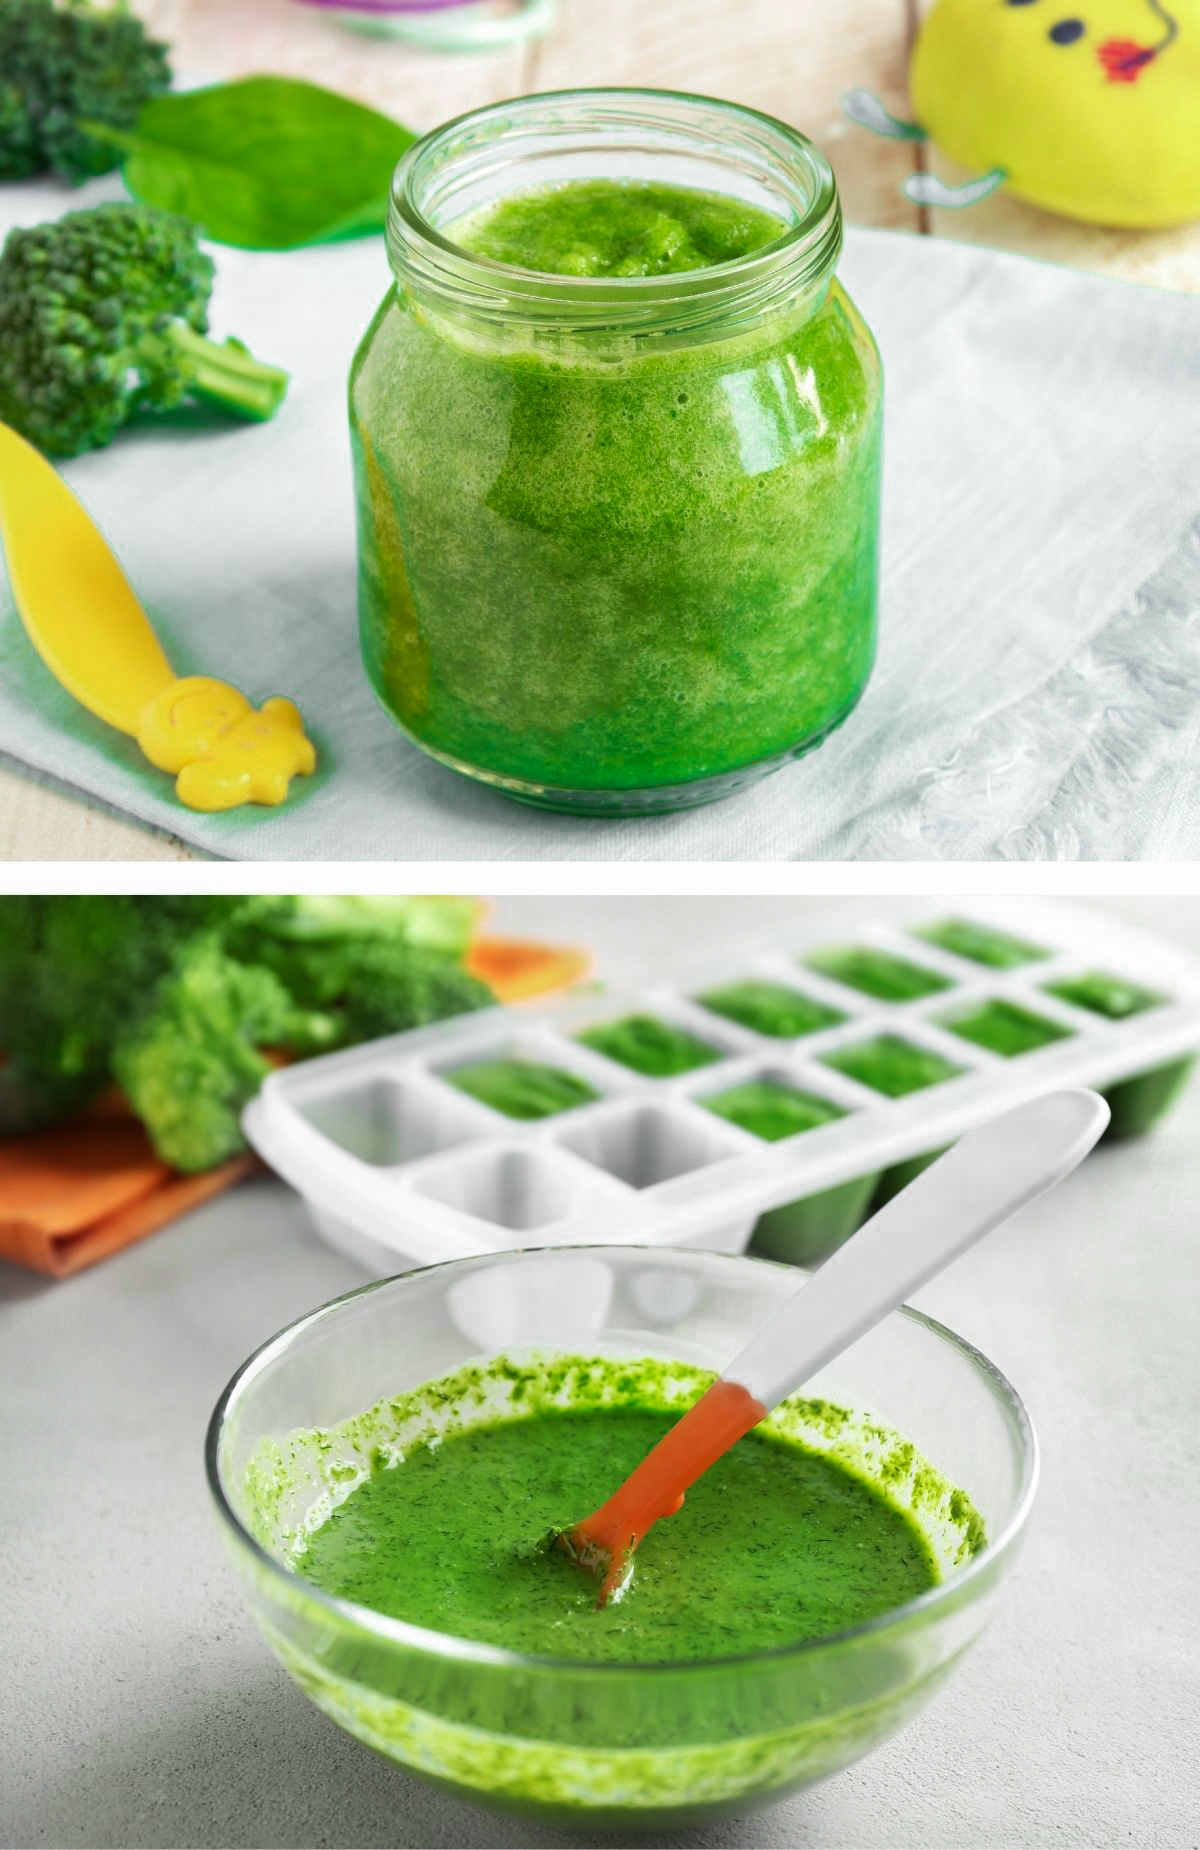 Store baby broccoli puree in a jar in the fridge or freeze as portioned cubes.